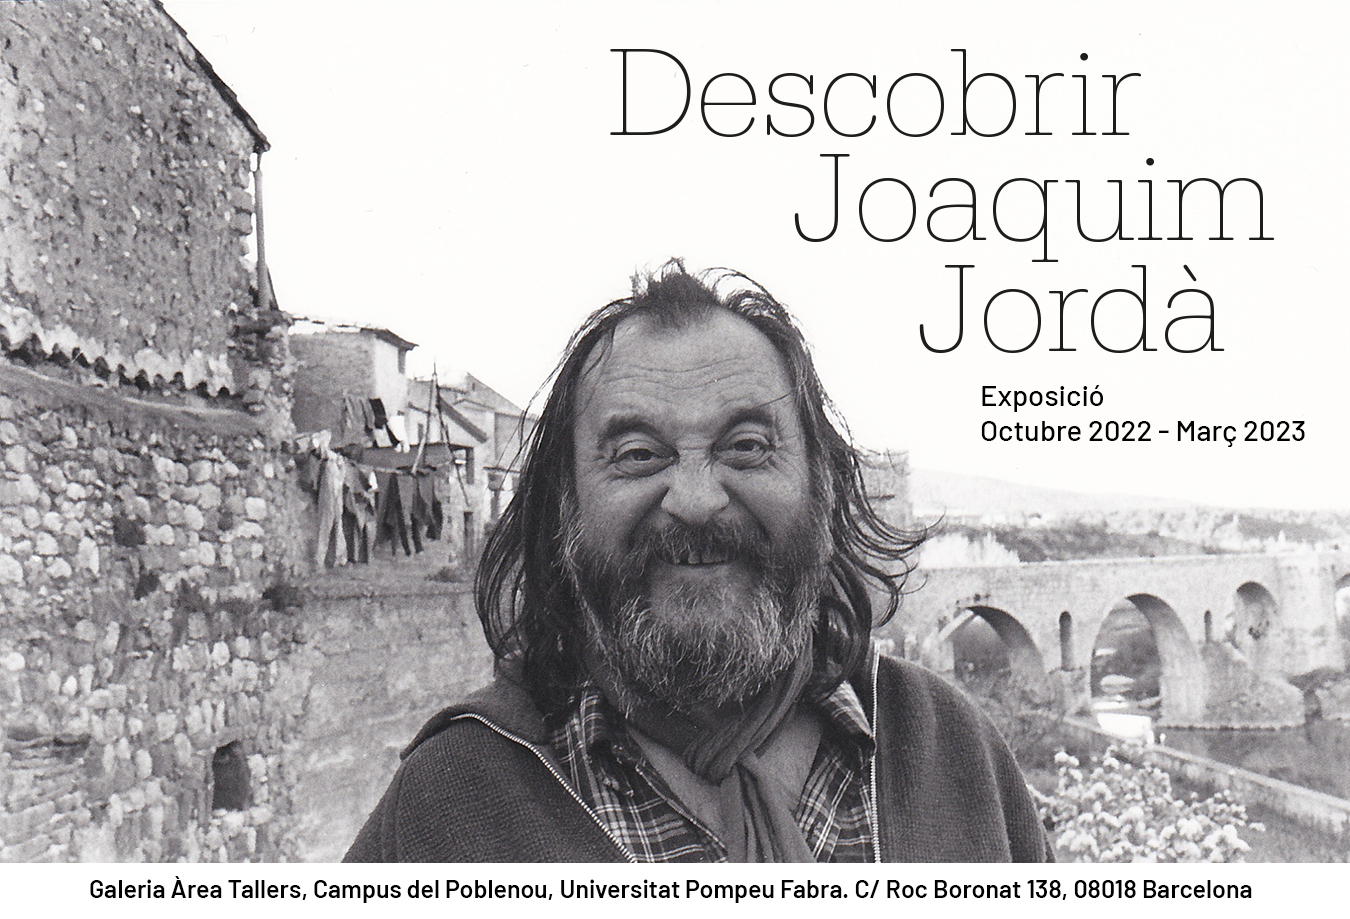 17/10/22: Inauguration of the exhibition “Discovering Joaquim Jordà”